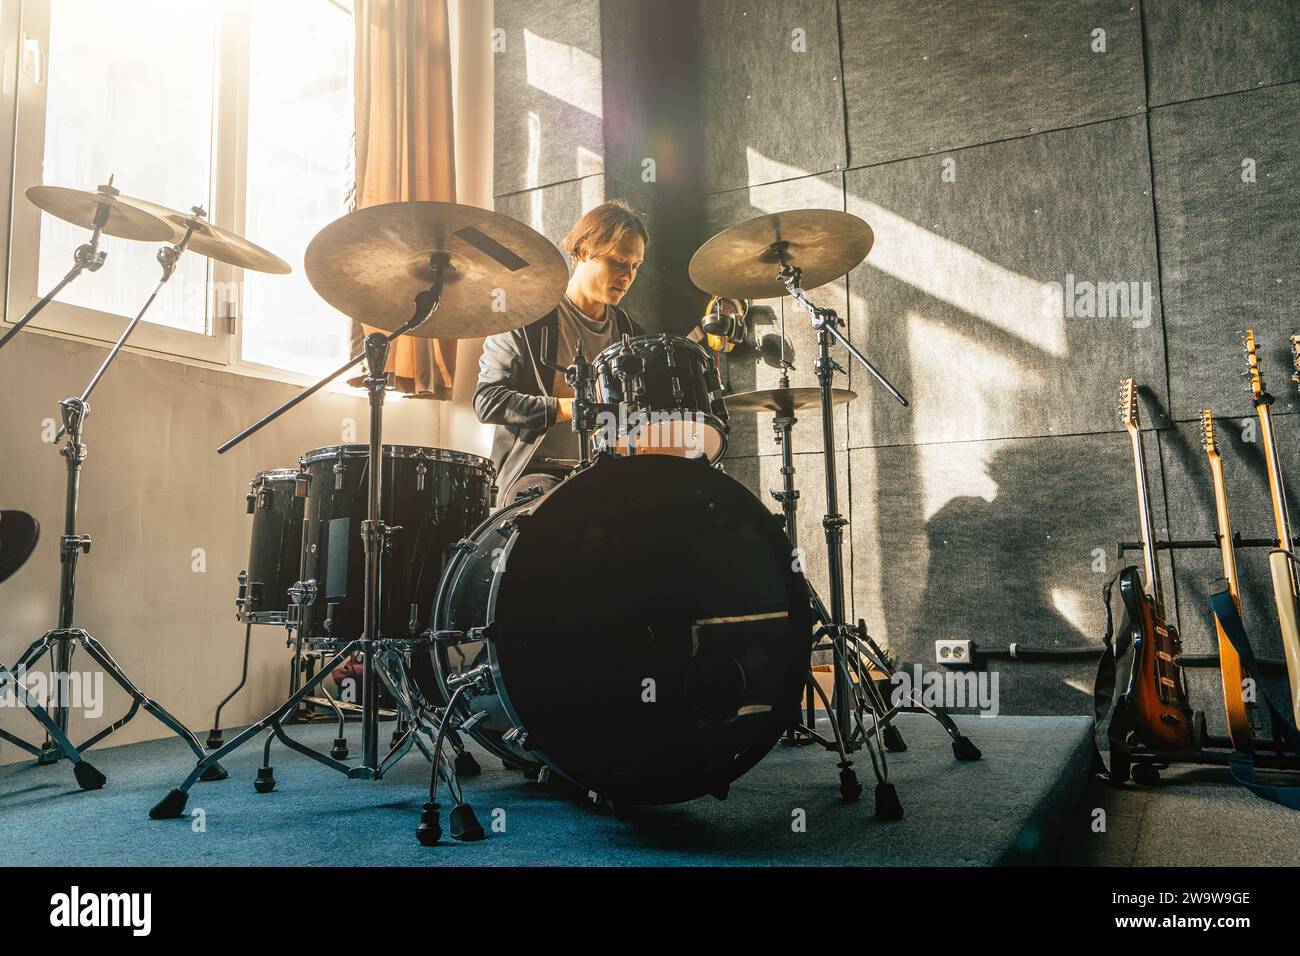 Portrait of drummer sitting at drum kit in sound recording studio at music band rehearsal. Stock Photo